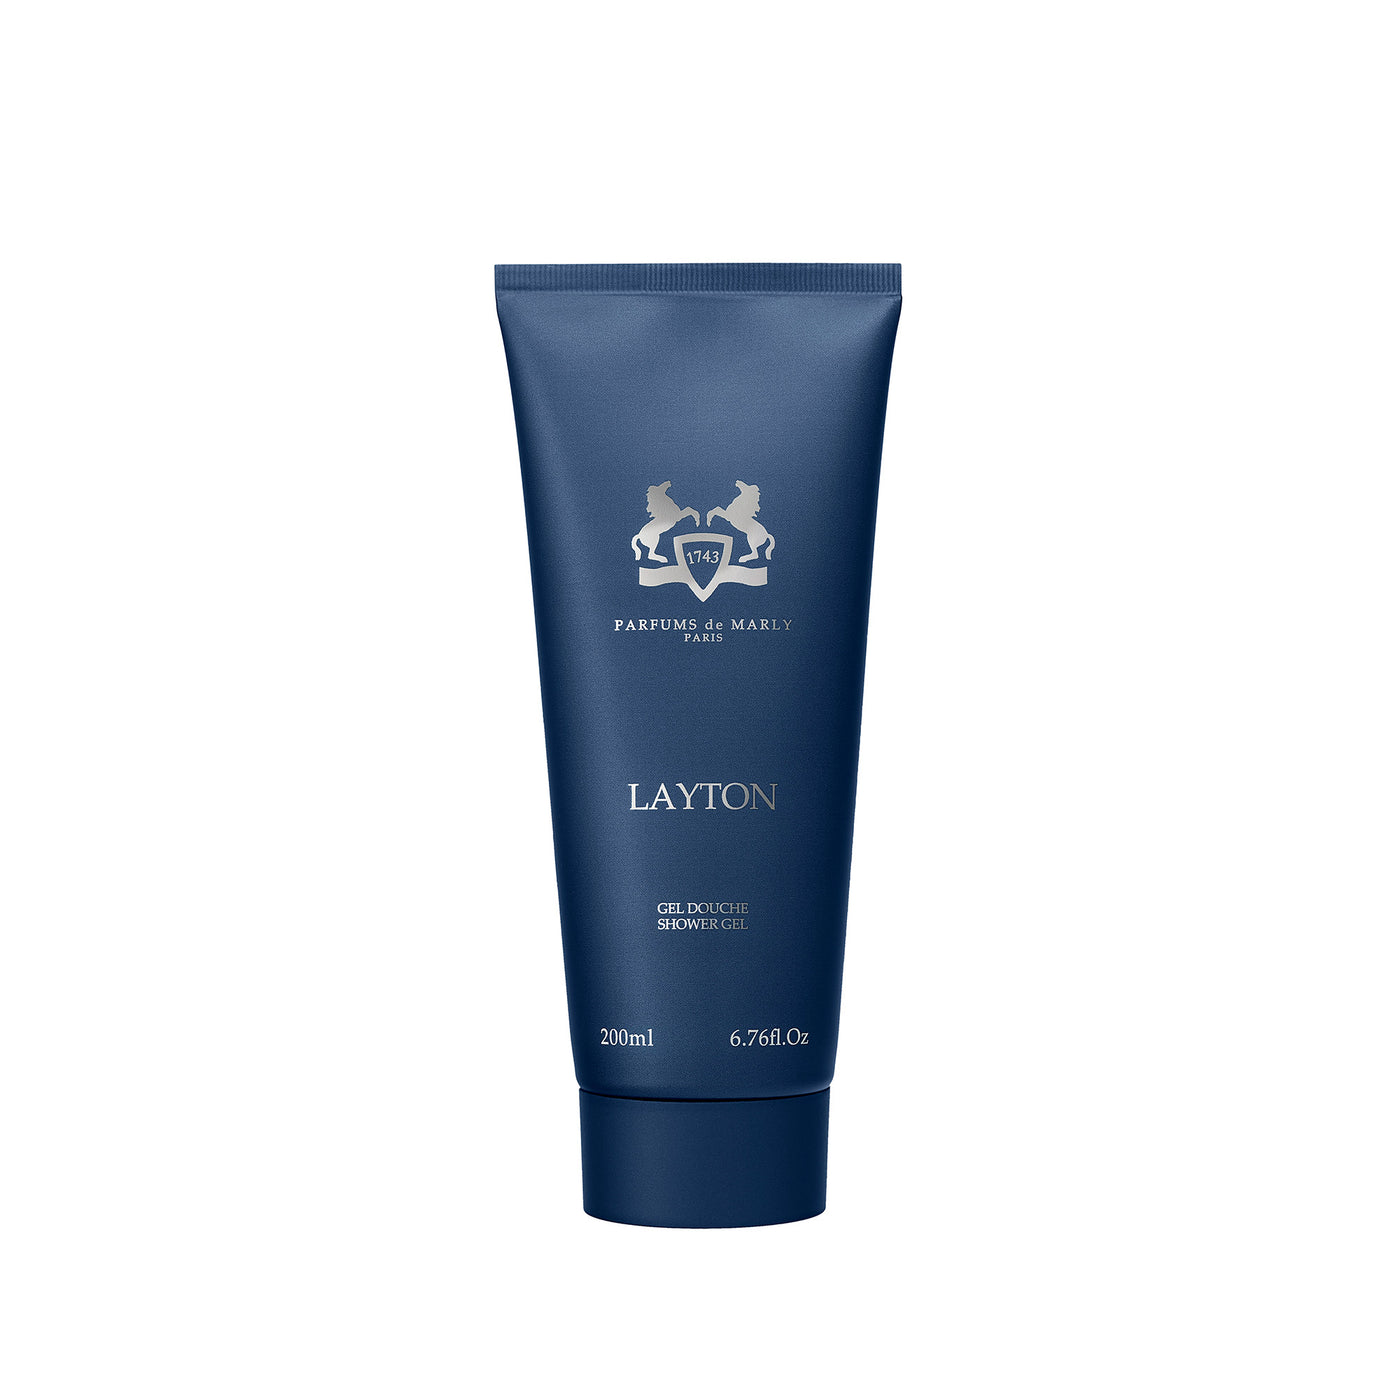 LAYTON SHOWER GEL - 200ml - Gharyal by Collectibles 